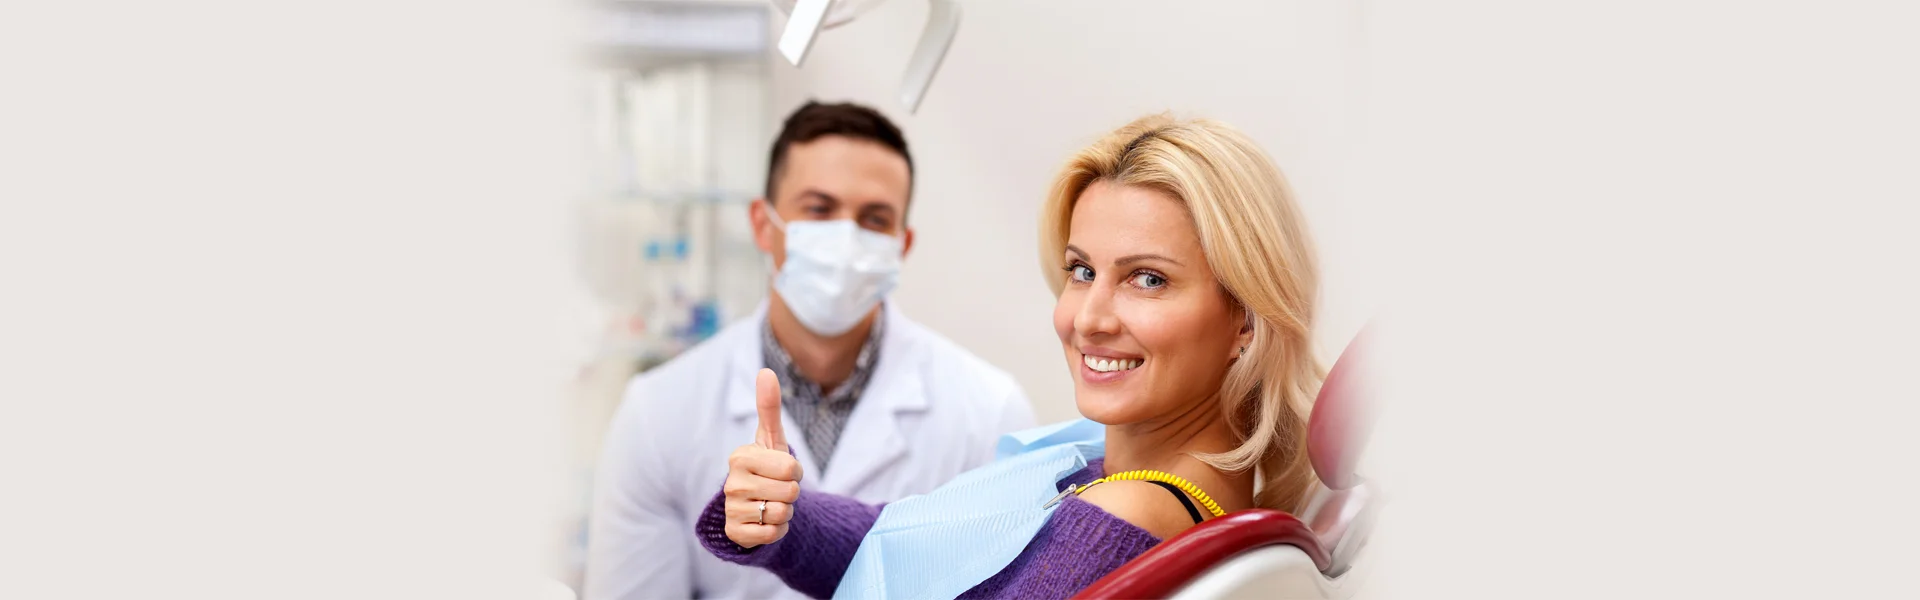 Why Regular Dental Exams and Cleanings Are Important for Your Oral Health